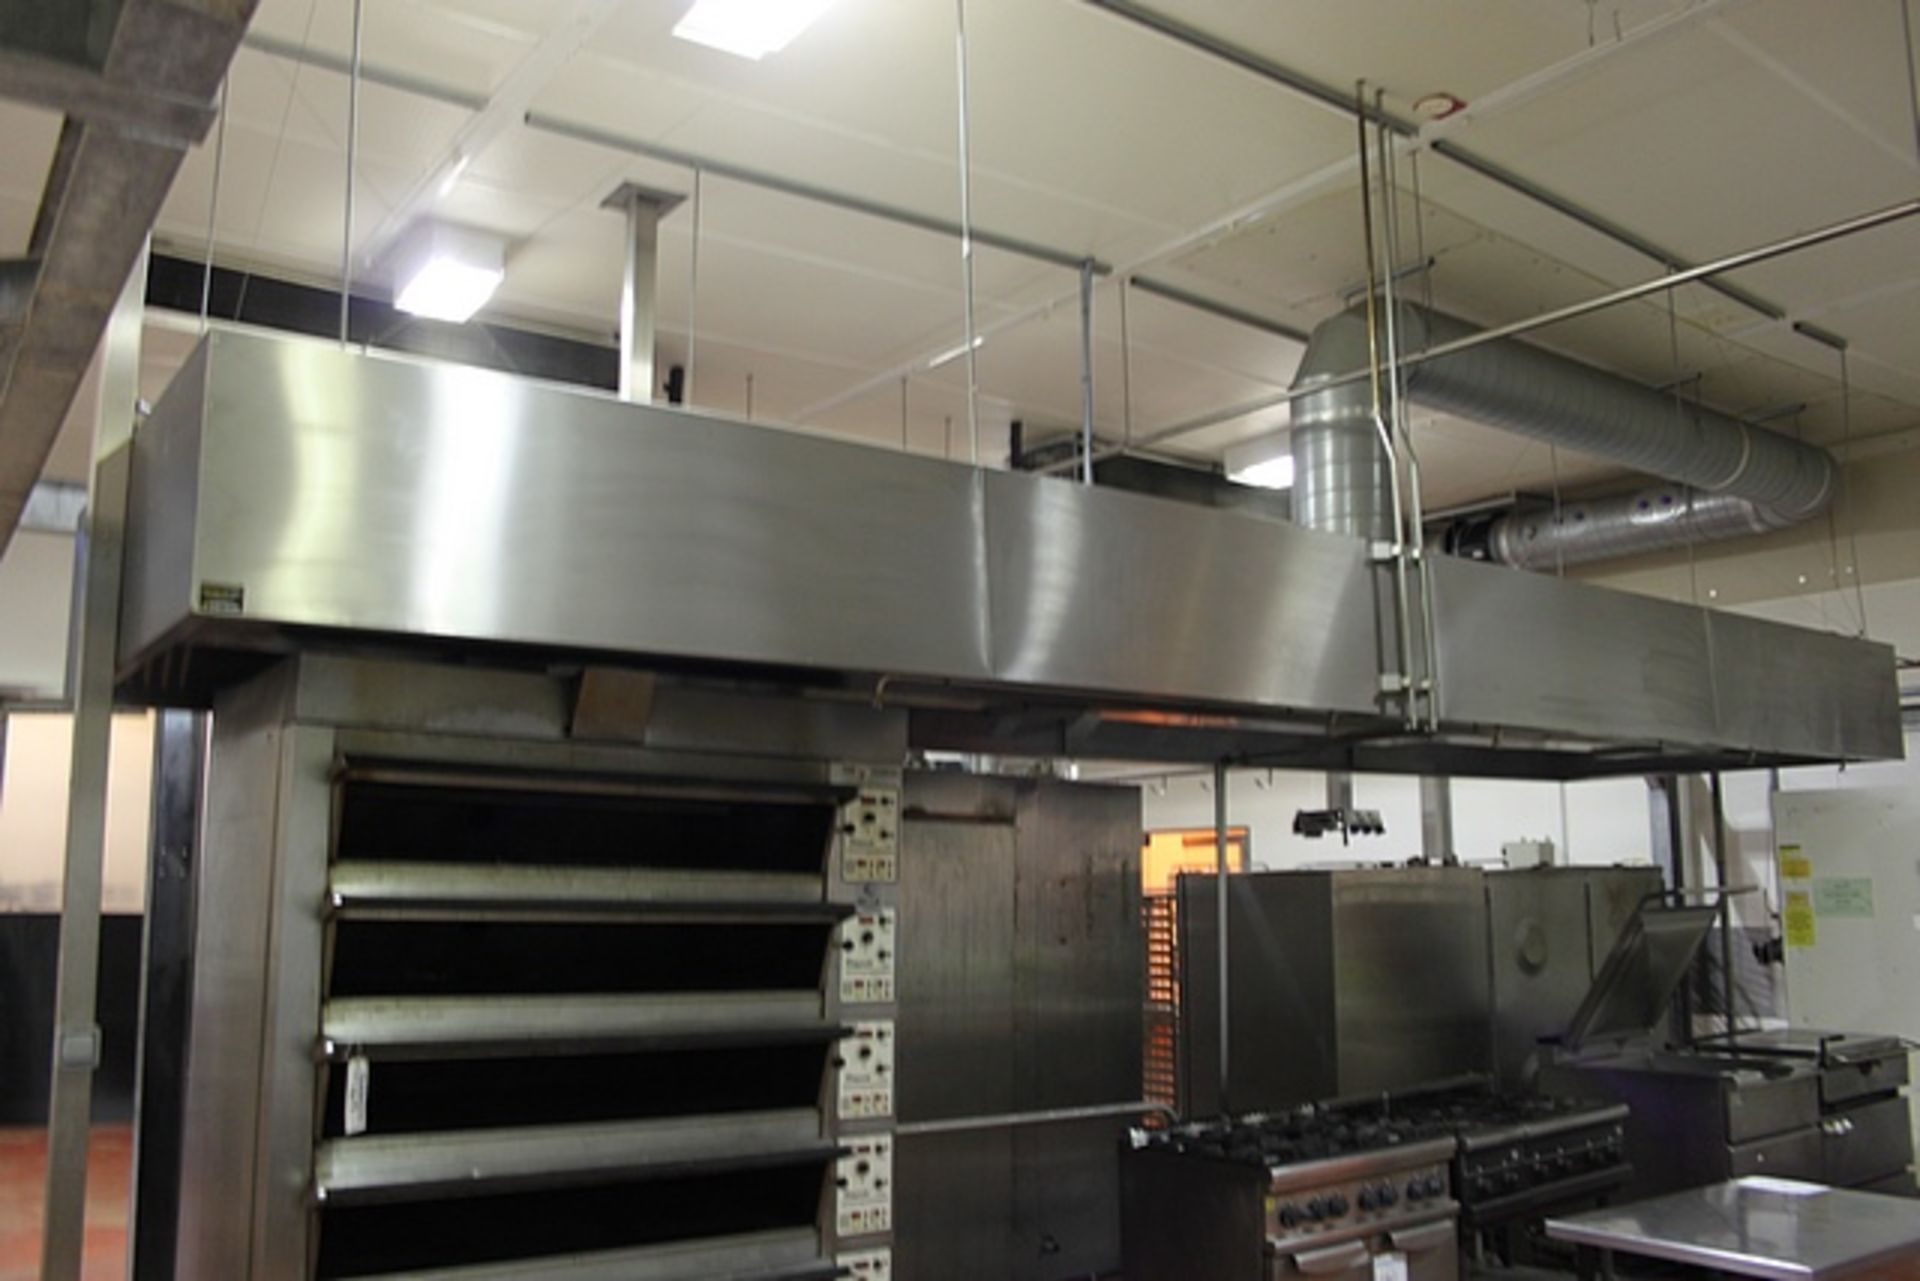 Canopy UK stainless steel commercial kitchen canopy high quality 1 mm thick 430 grade stainless - Image 3 of 4